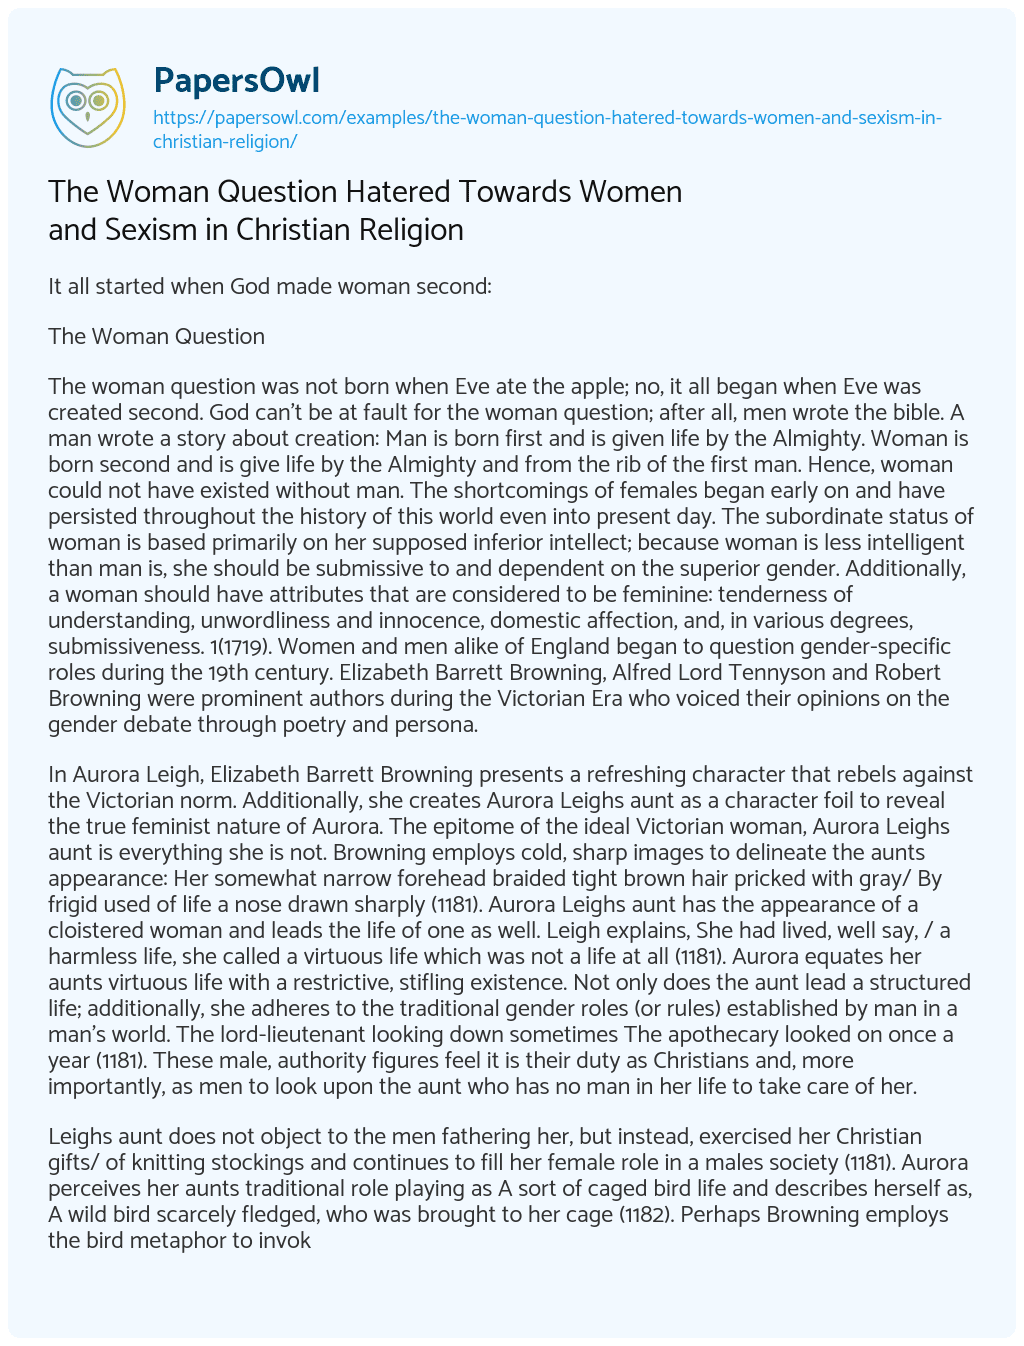 Essay on The Woman Question Hatered Towards Women and Sexism in Christian Religion